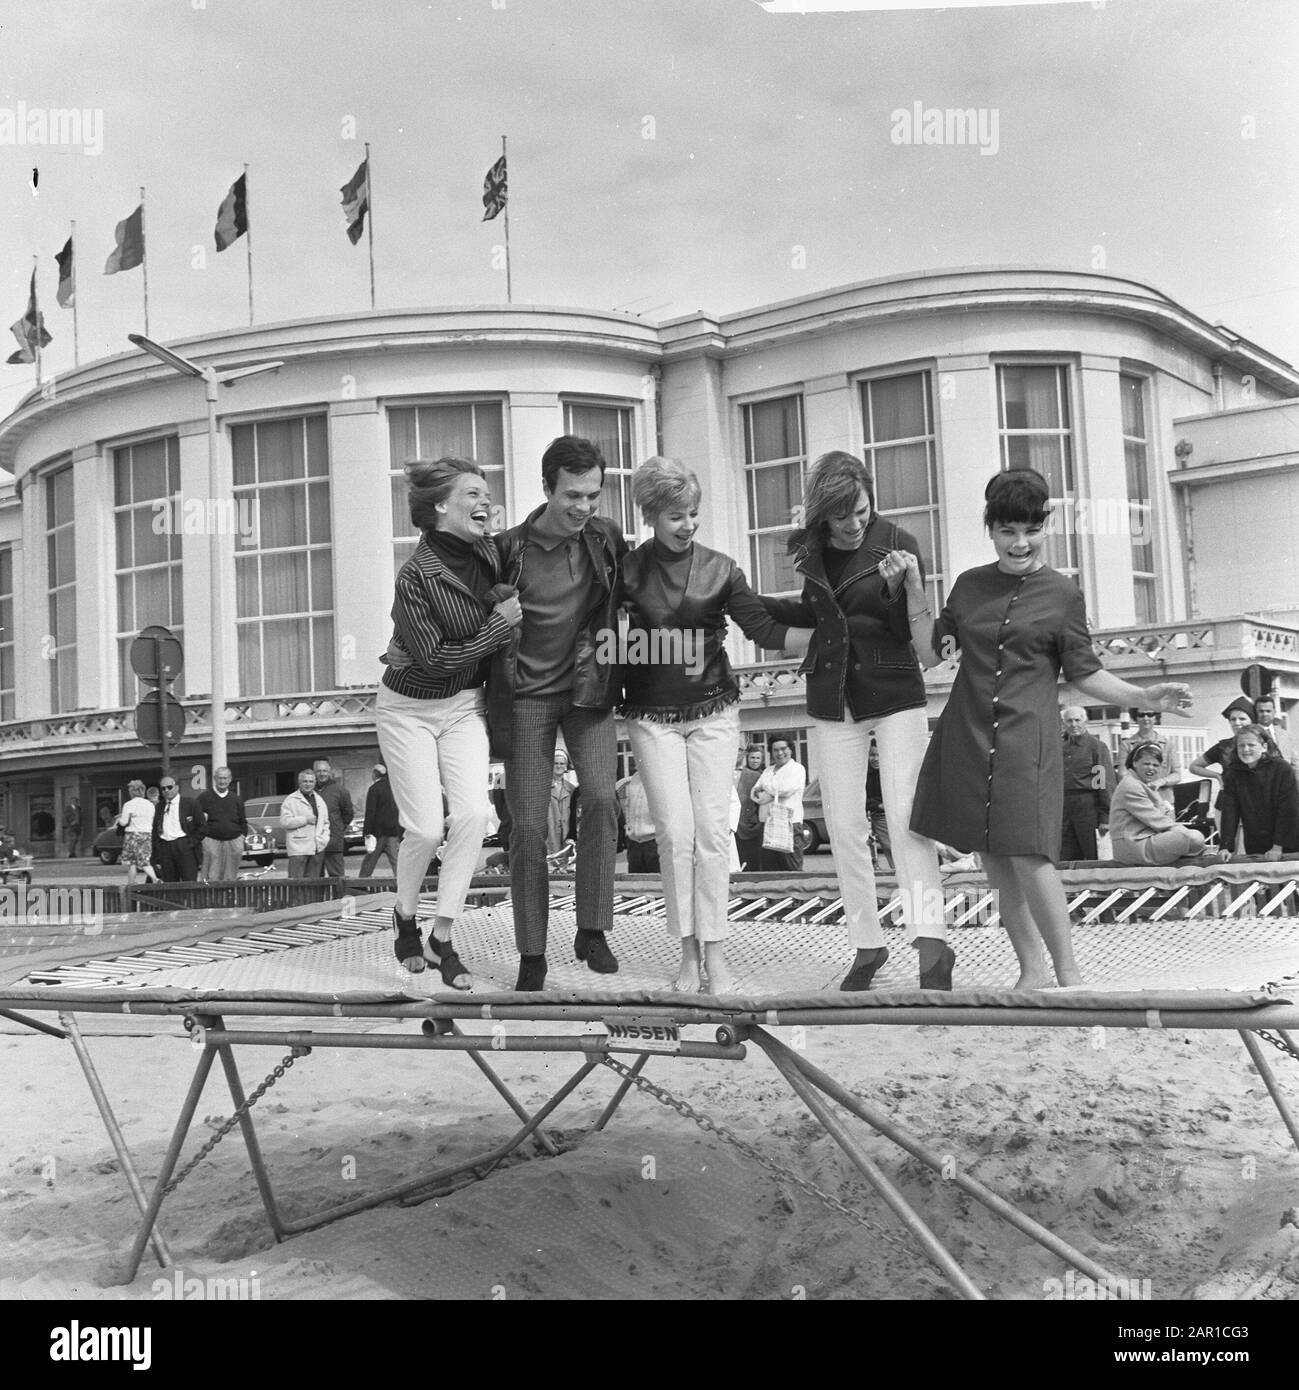 Seventh Europa Cup for Singing at Knokke, the singing team on the trampoline  at the beach Date: 10 July 1965 Location: Knokke Keywords: beaches, singers  Personal name: Europacup Stock Photo - Alamy